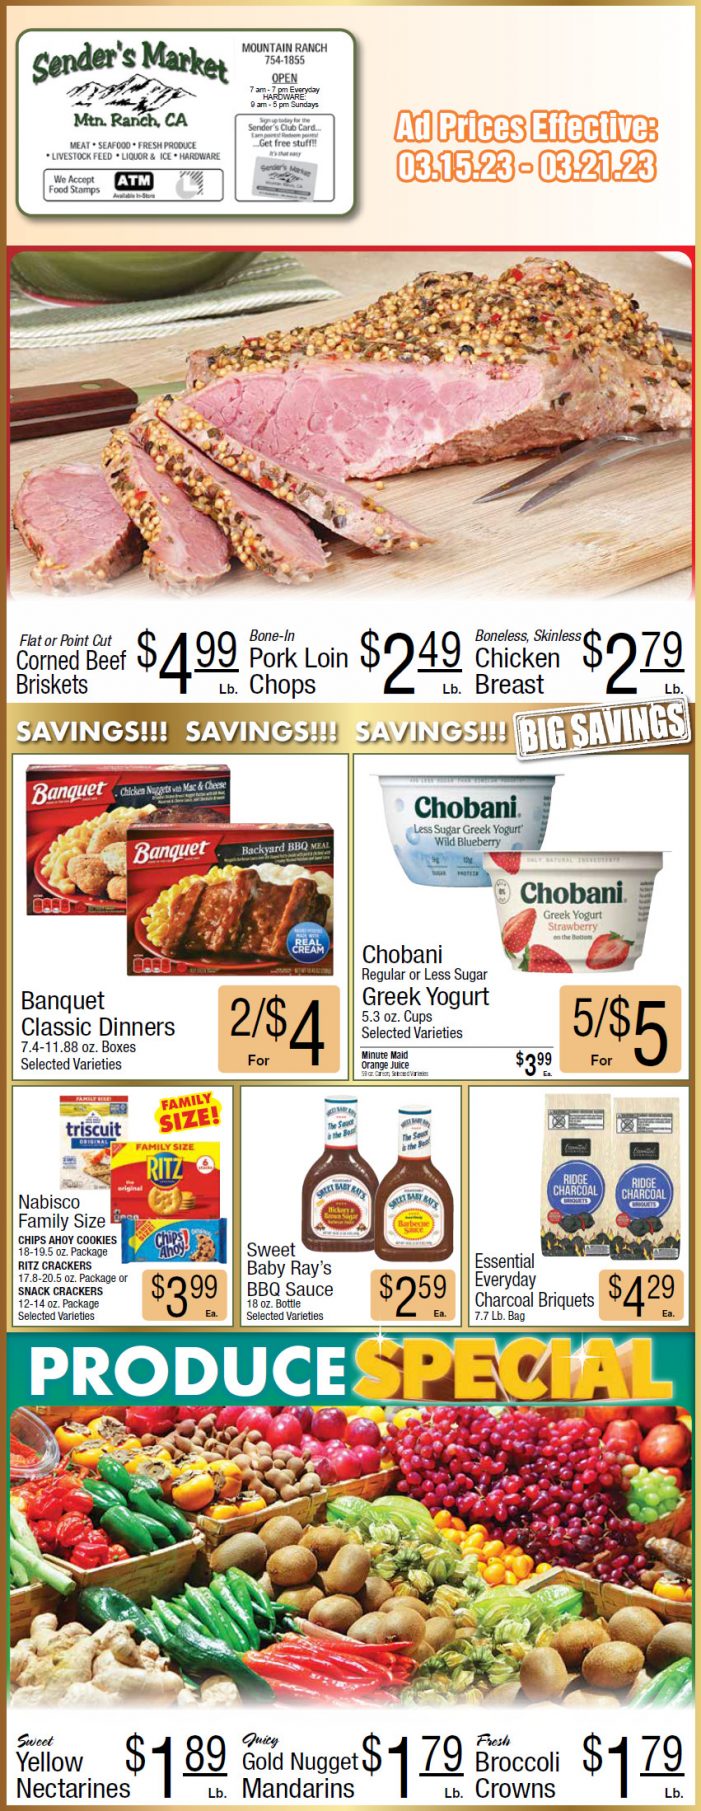 Sender’s Market Weekly Ad & Grocery Specials March 15th – 21st! Shop Local & Save!!